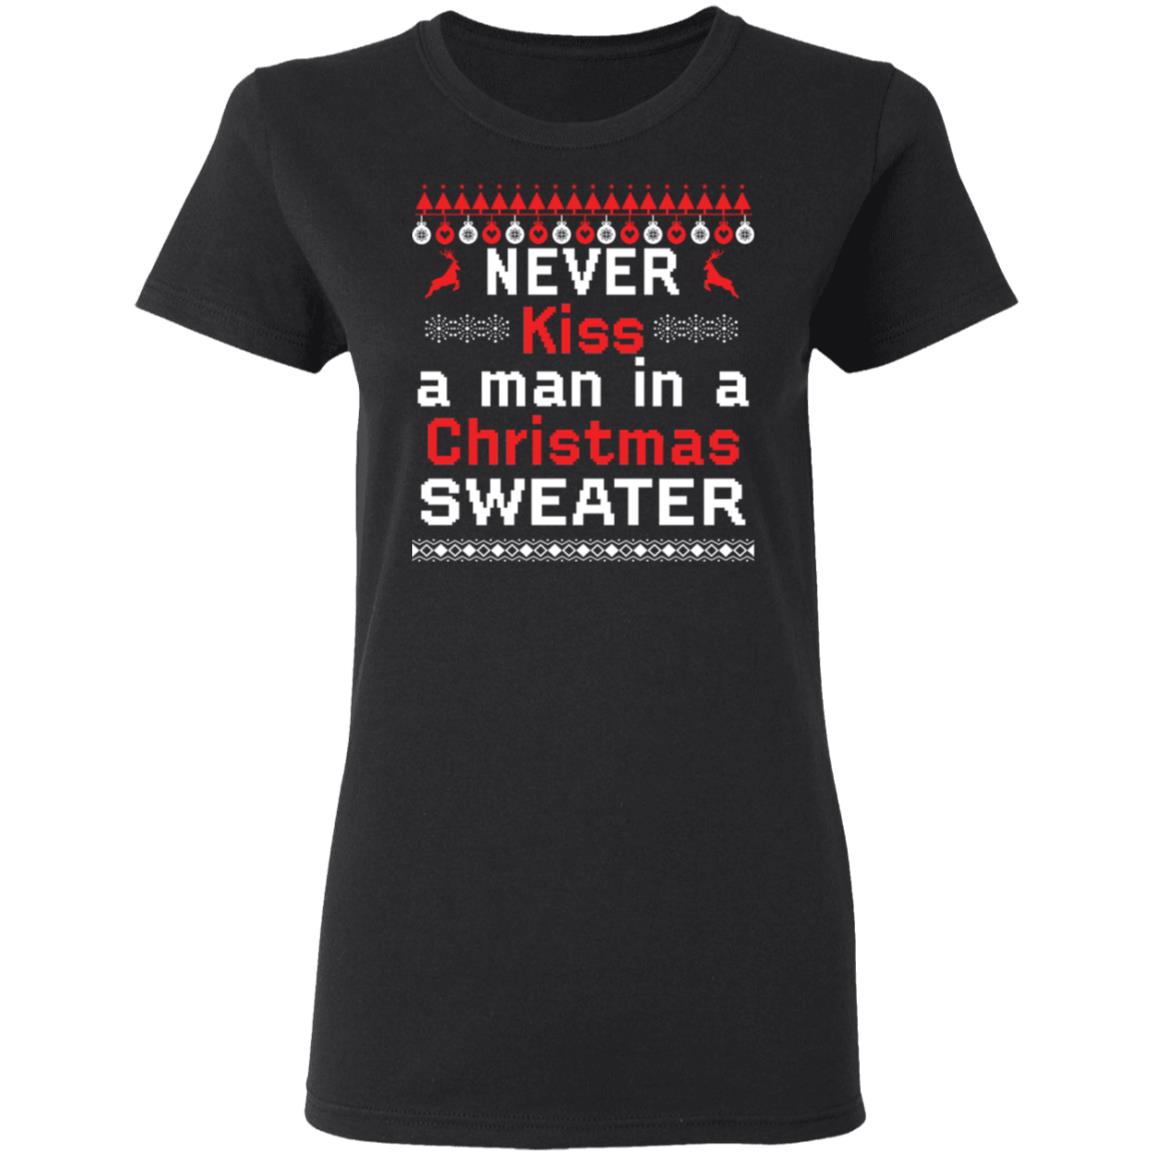 Never kiss a man in a Christmas sweater - Rockatee - Never Kiss A Man In A Christmas Sweater